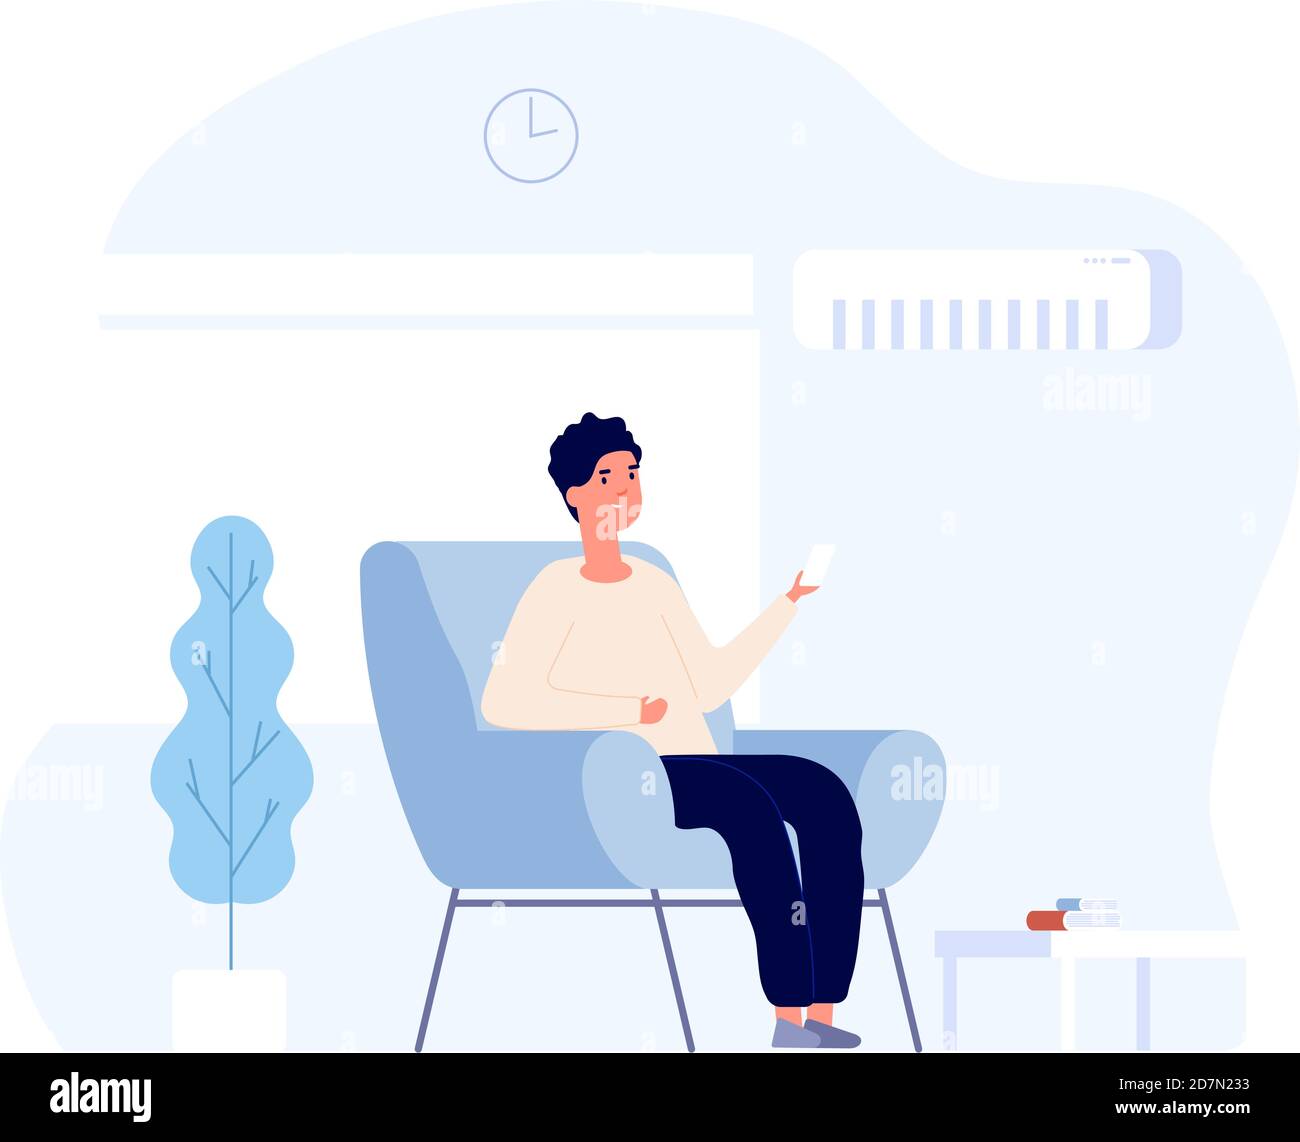 Air conditioner concept. Young man sitting in home chair under air conditioning system. summer room cooling and cleaning. Vector image. Illustration of comfort control home, conditioner used man Stock Vector